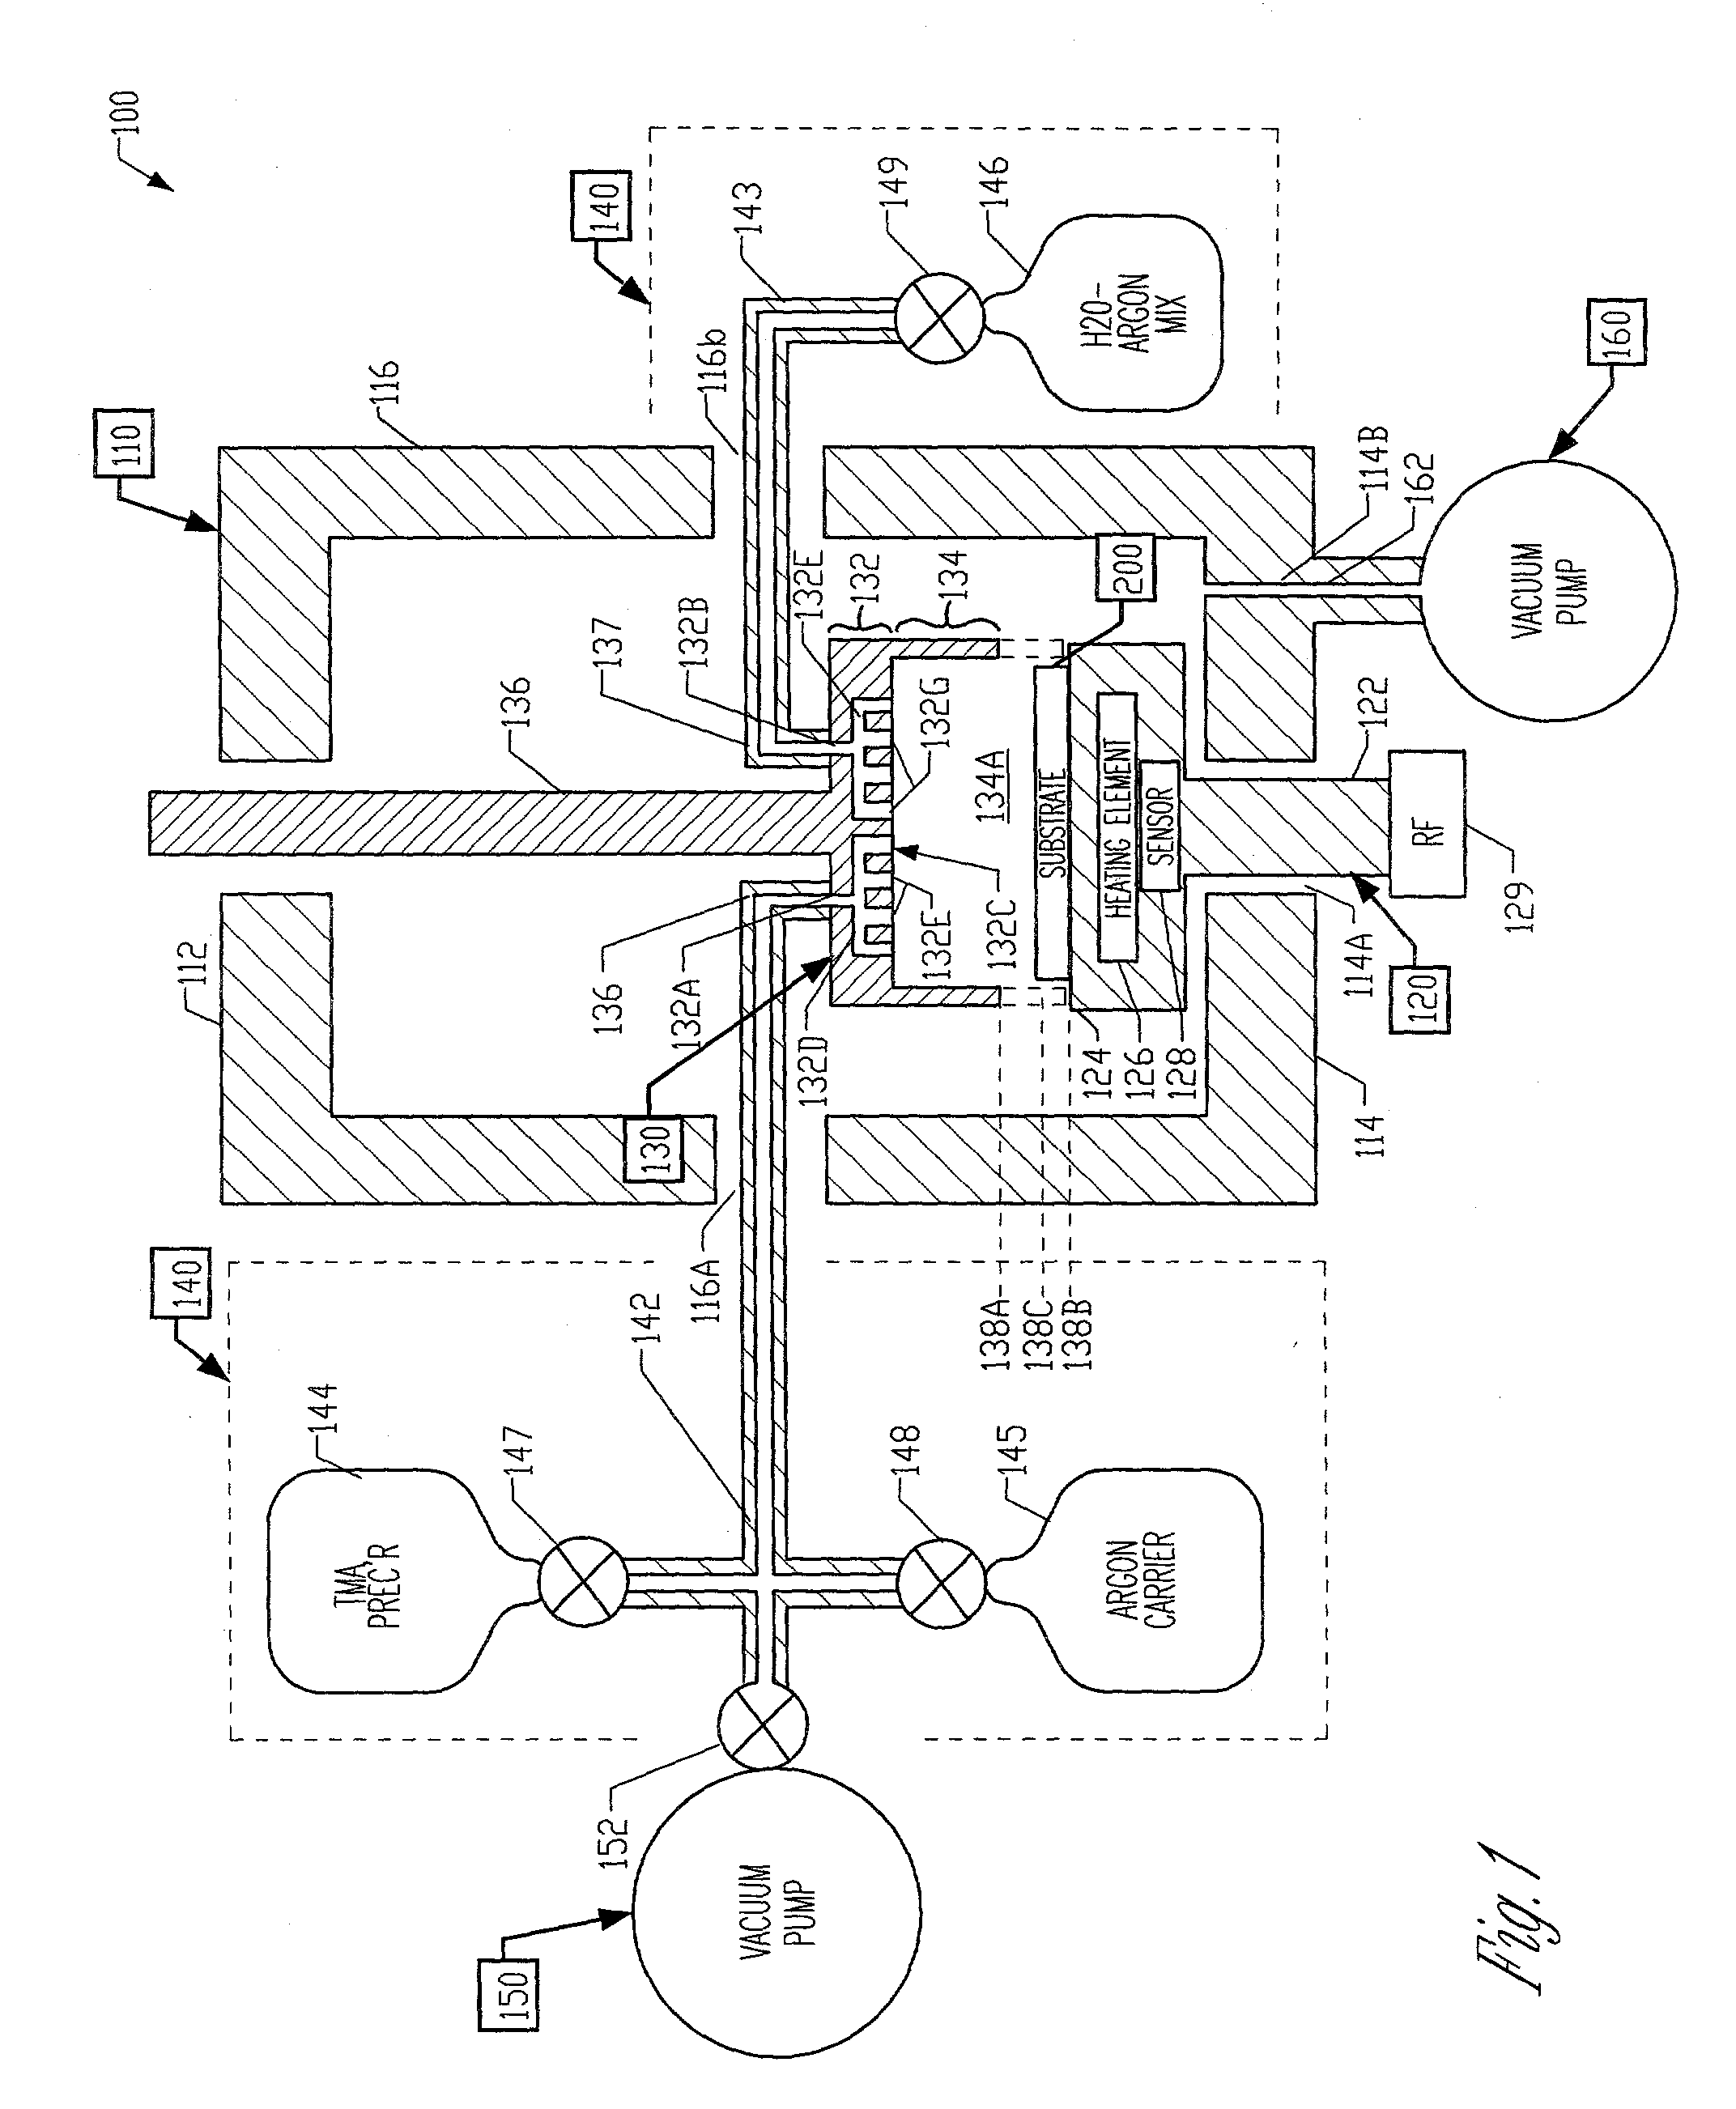 Methods, systems, and apparatus for atomic-layer deposition of aluminum oxides in integrated circuits